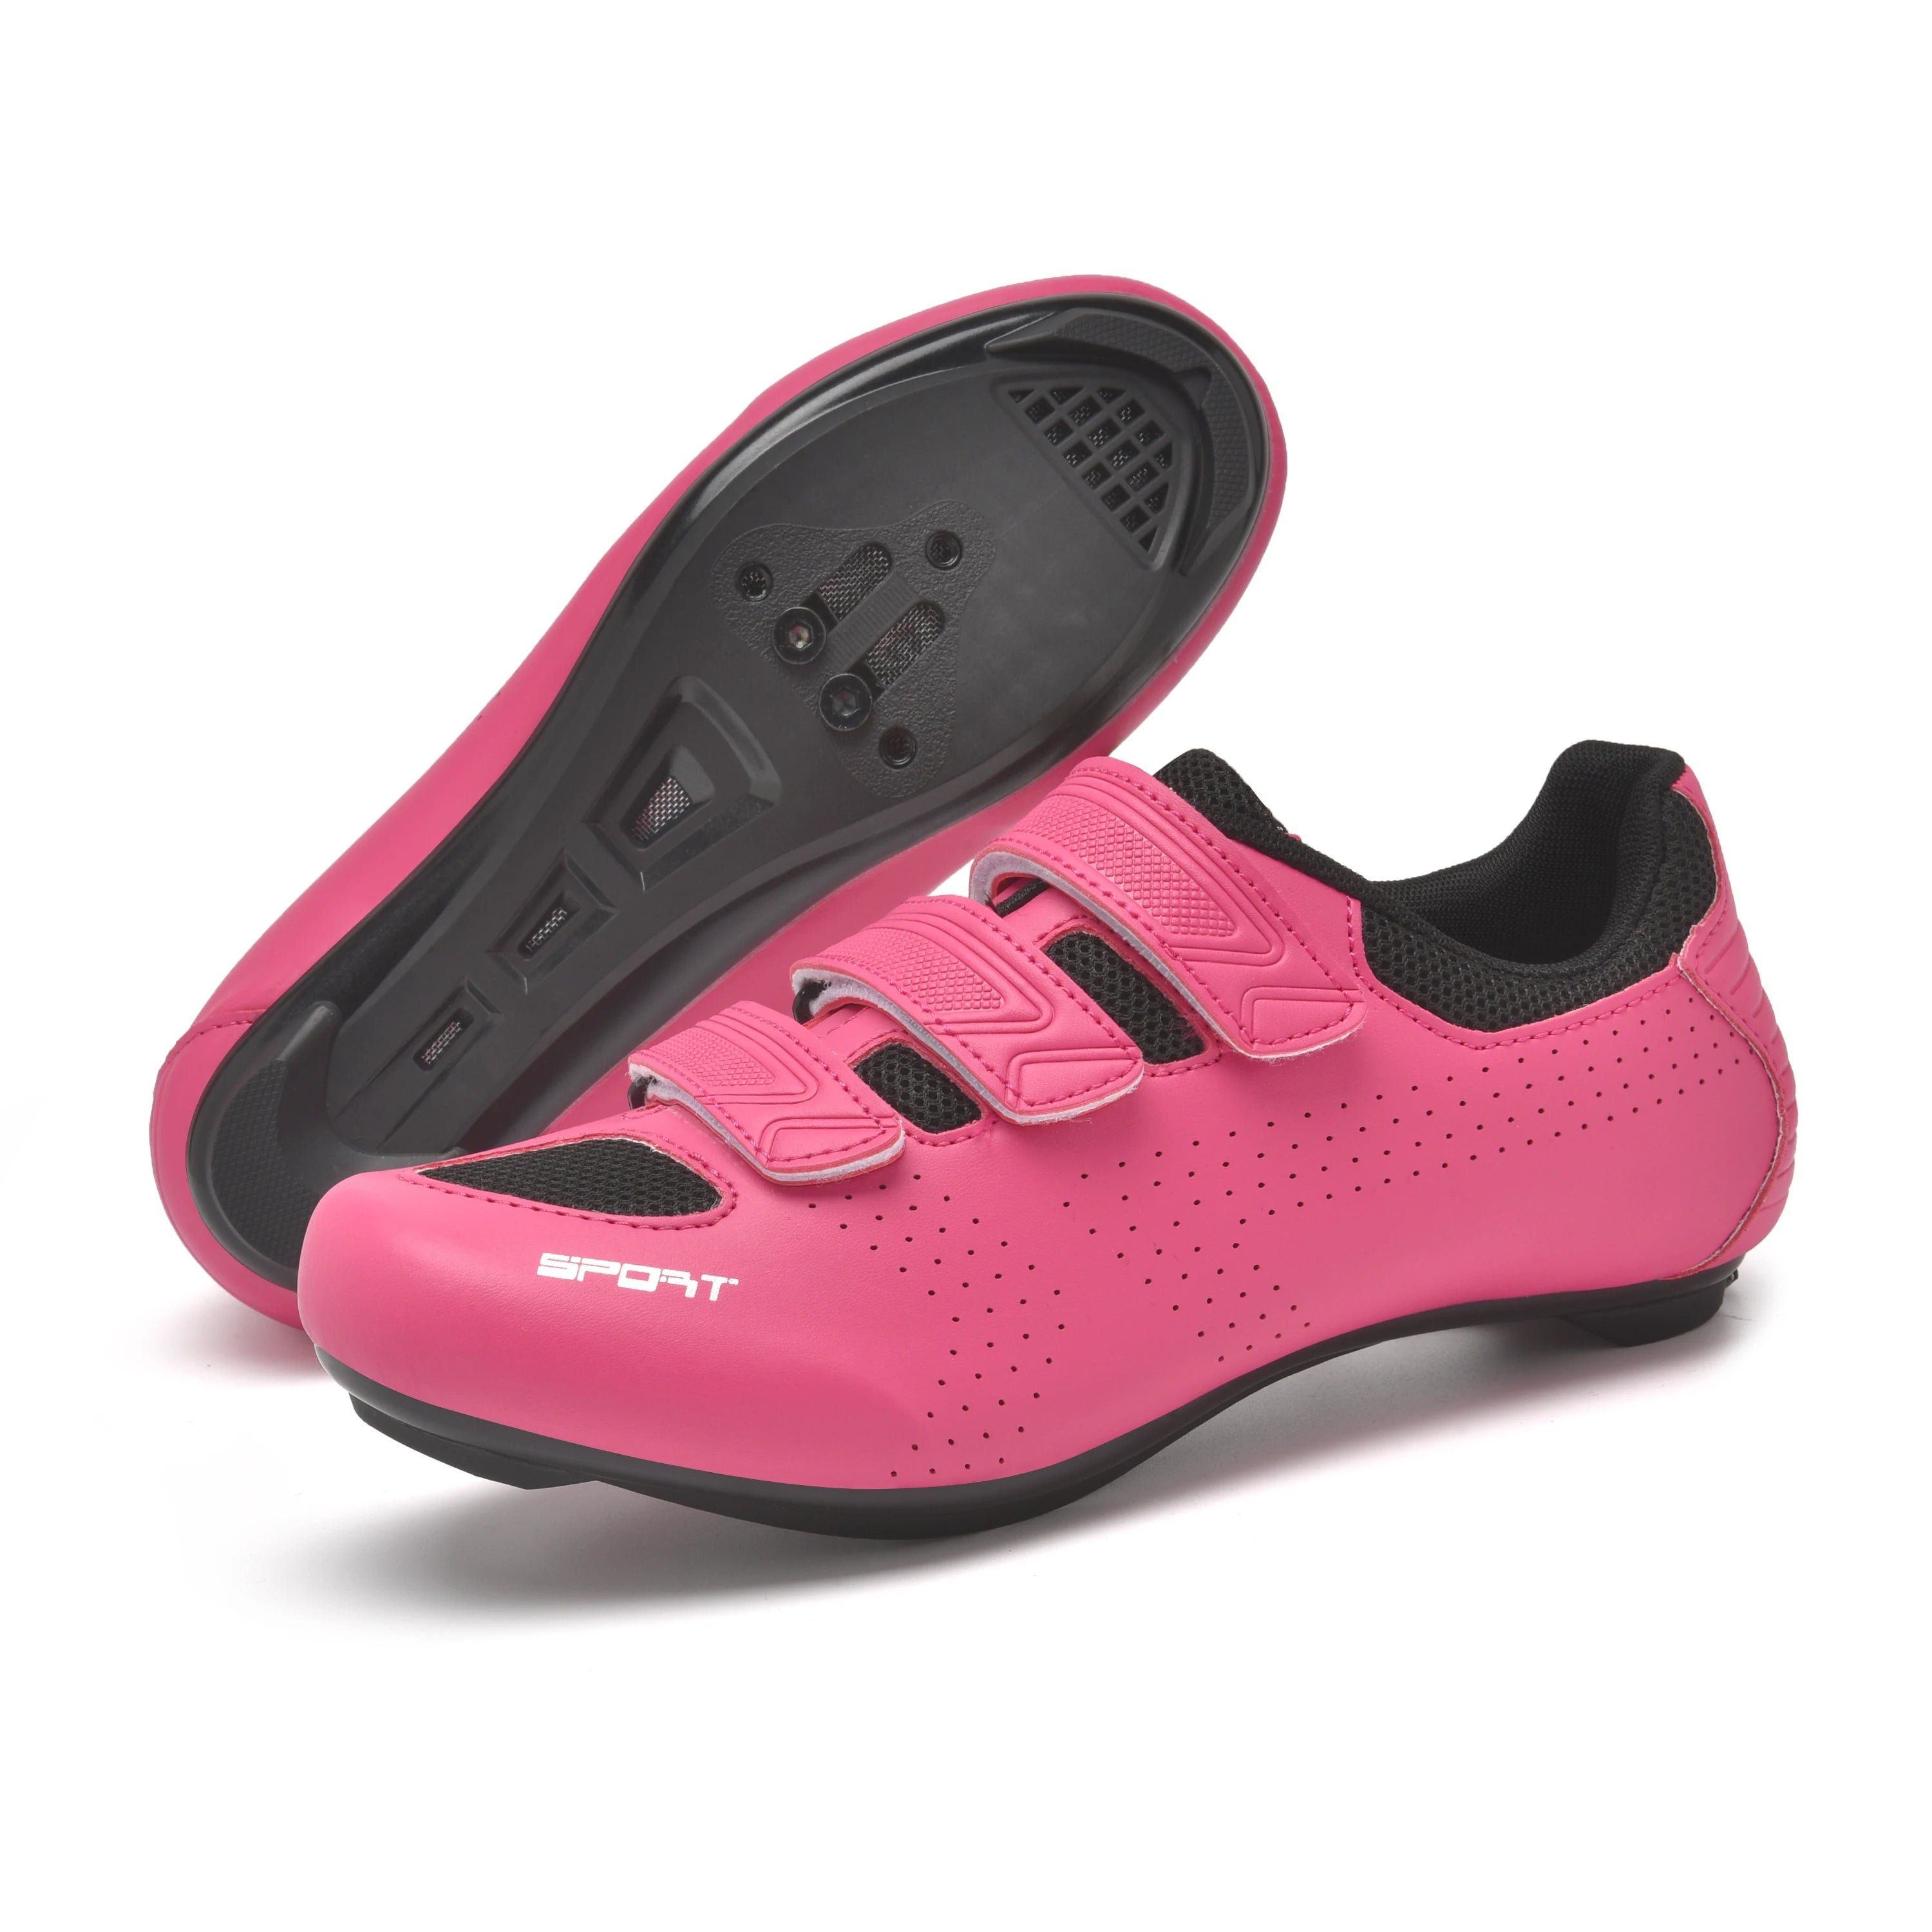 Women Cycling Shoes for Road or Mountain bike- With Cleats,  Cleatless, or flat rubber pink pair